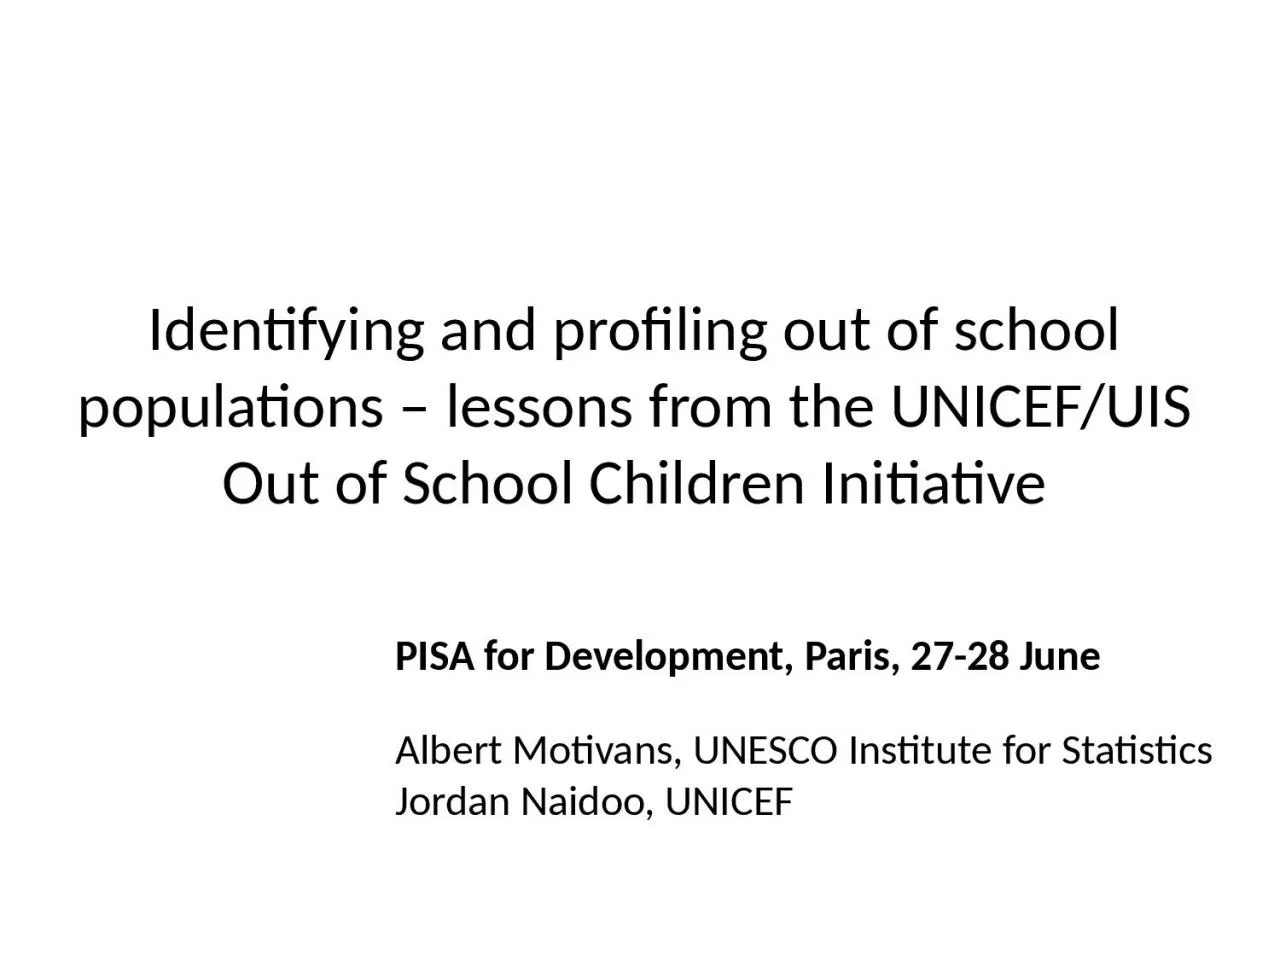 Identifying and profiling out of school populations – lessons from the UNICEF/UIS Out